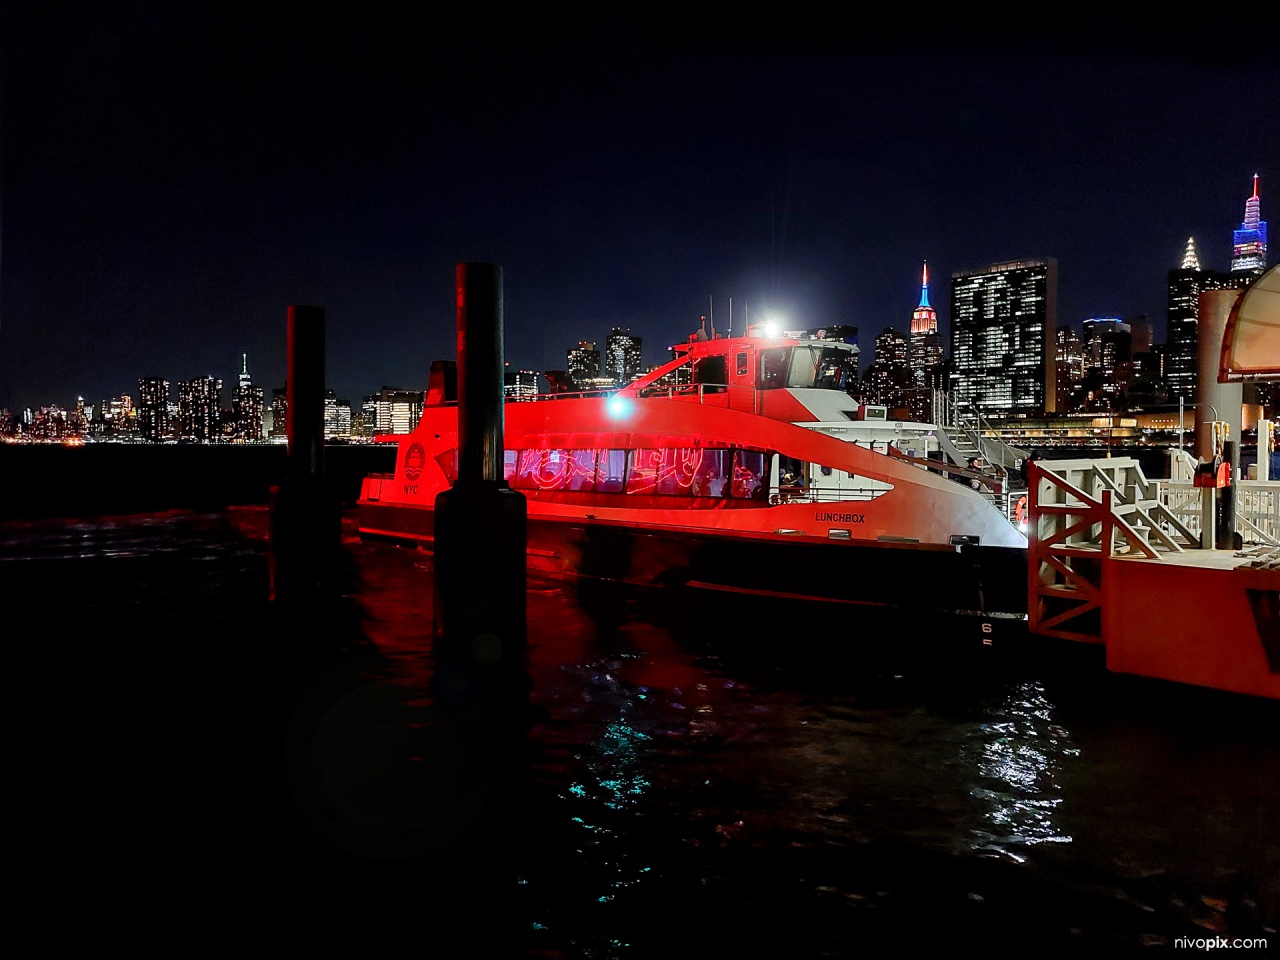 NYC Ferry (Lunchbox) at Long Island City